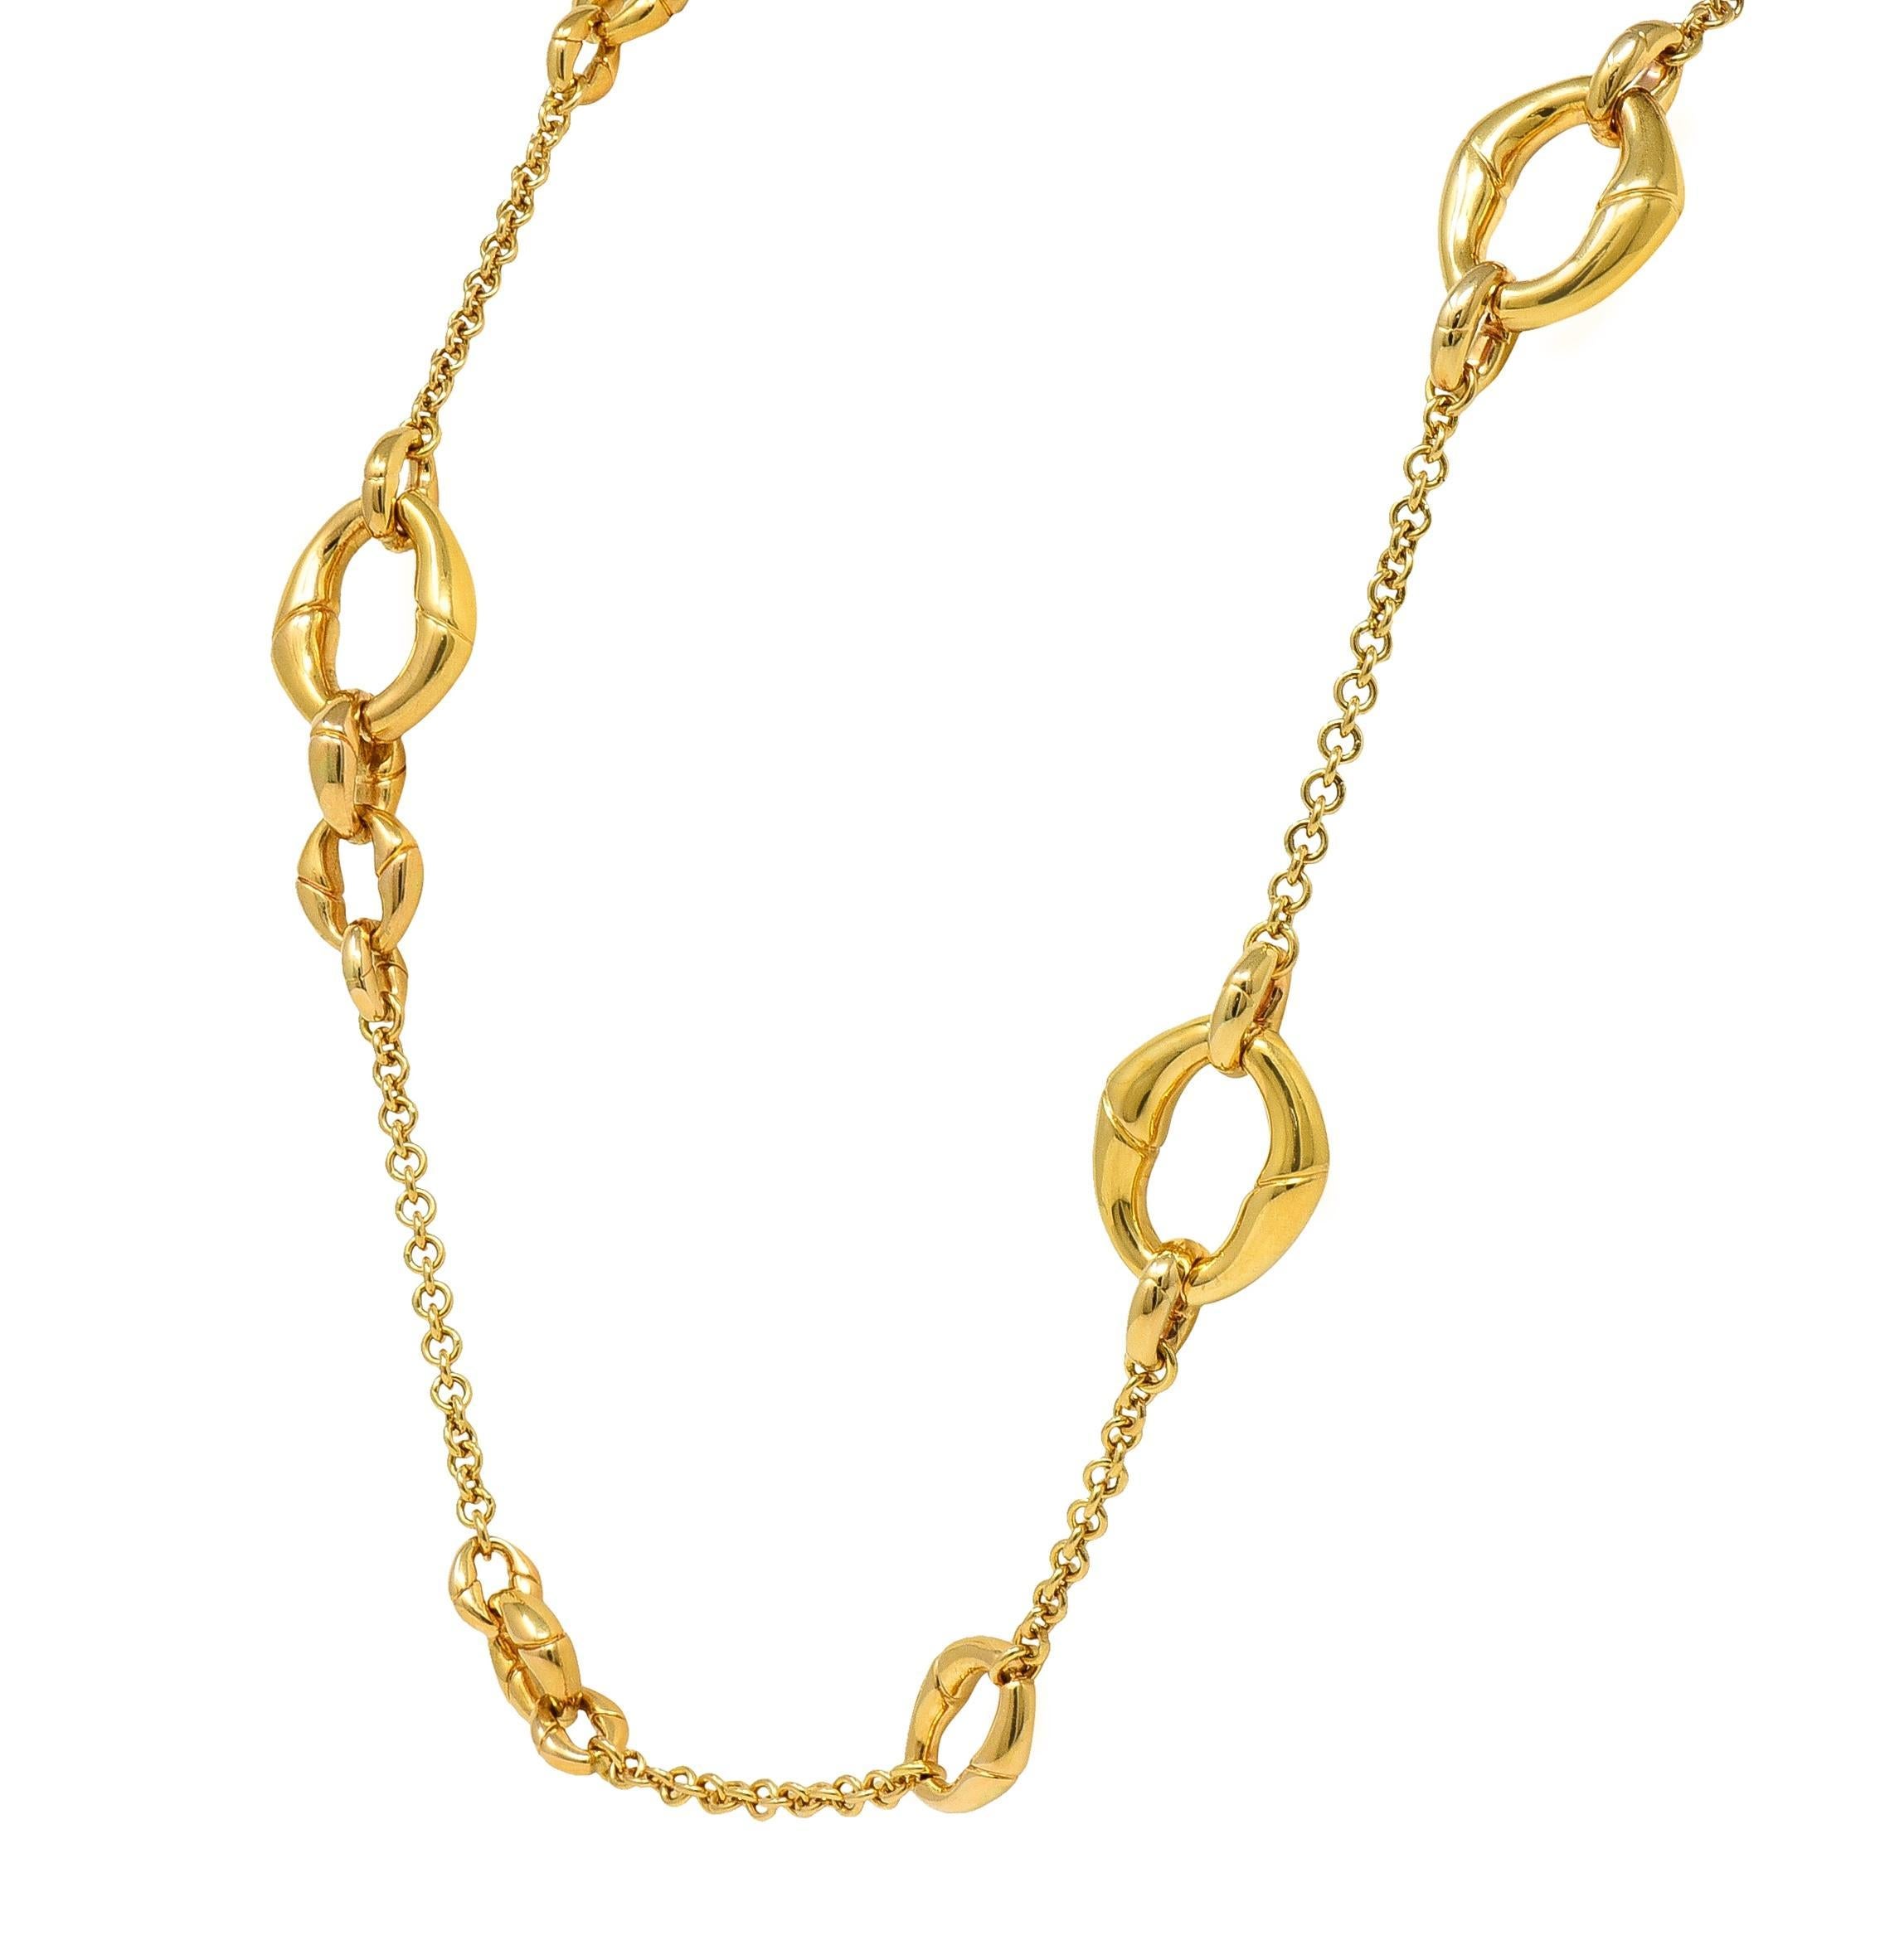 Gucci Contemporary 18 Karat Yellow Gold Bamboo Link Station Necklace For Sale 7